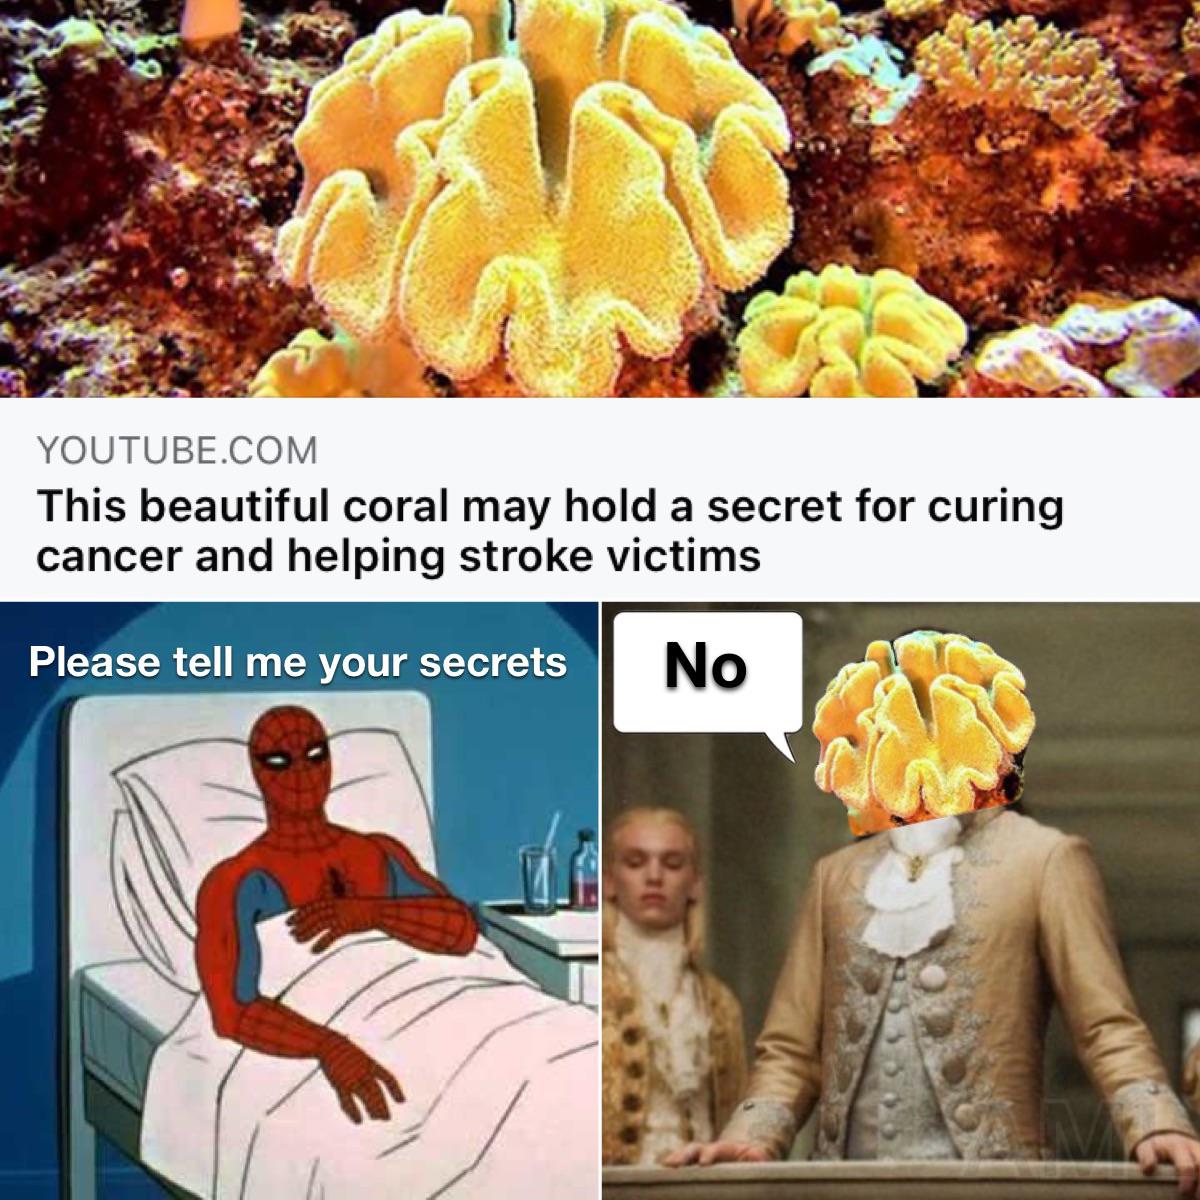 spiderman cancer template - Youtube.Com This beautiful coral may hold a secret for curing cancer and helping stroke victims Please tell me your secrets No